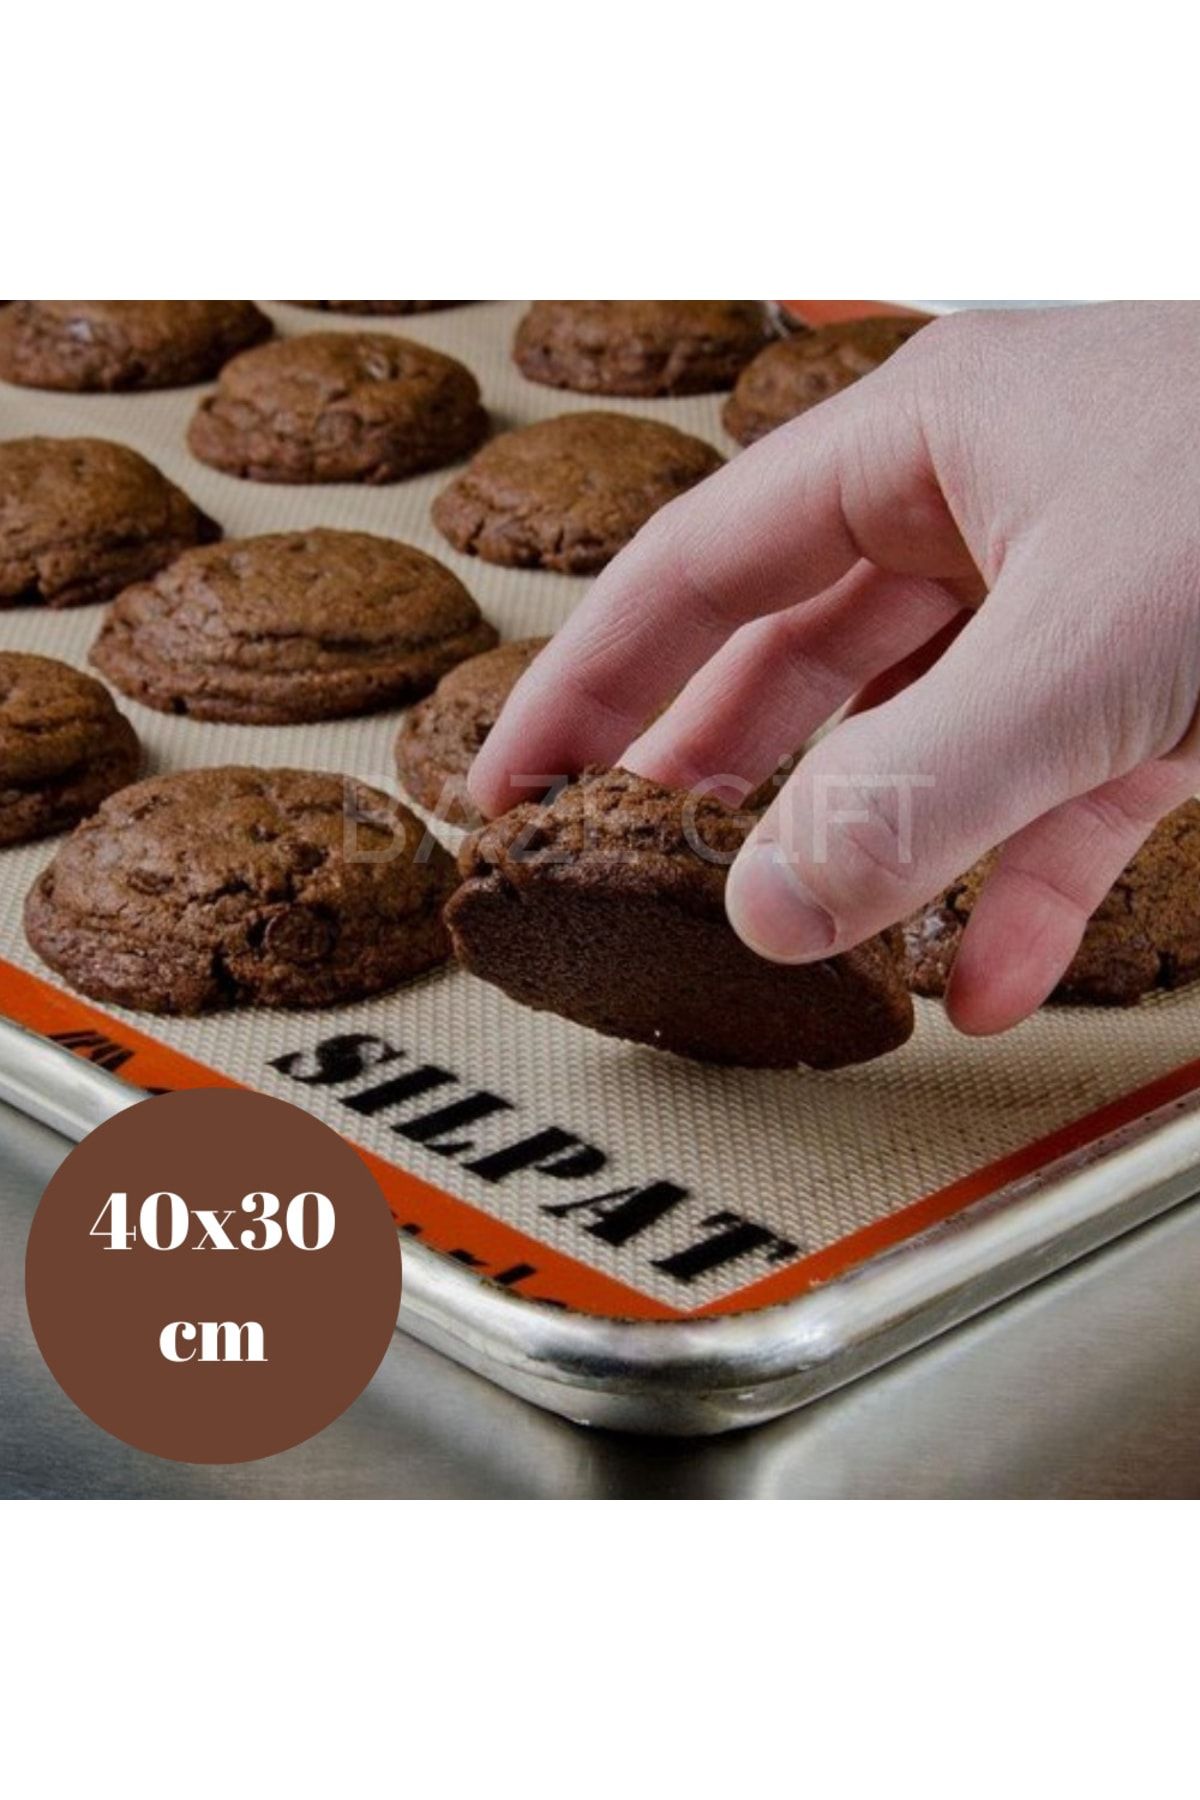 SILPAT COOKIE SIZE– Shop in the Kitchen